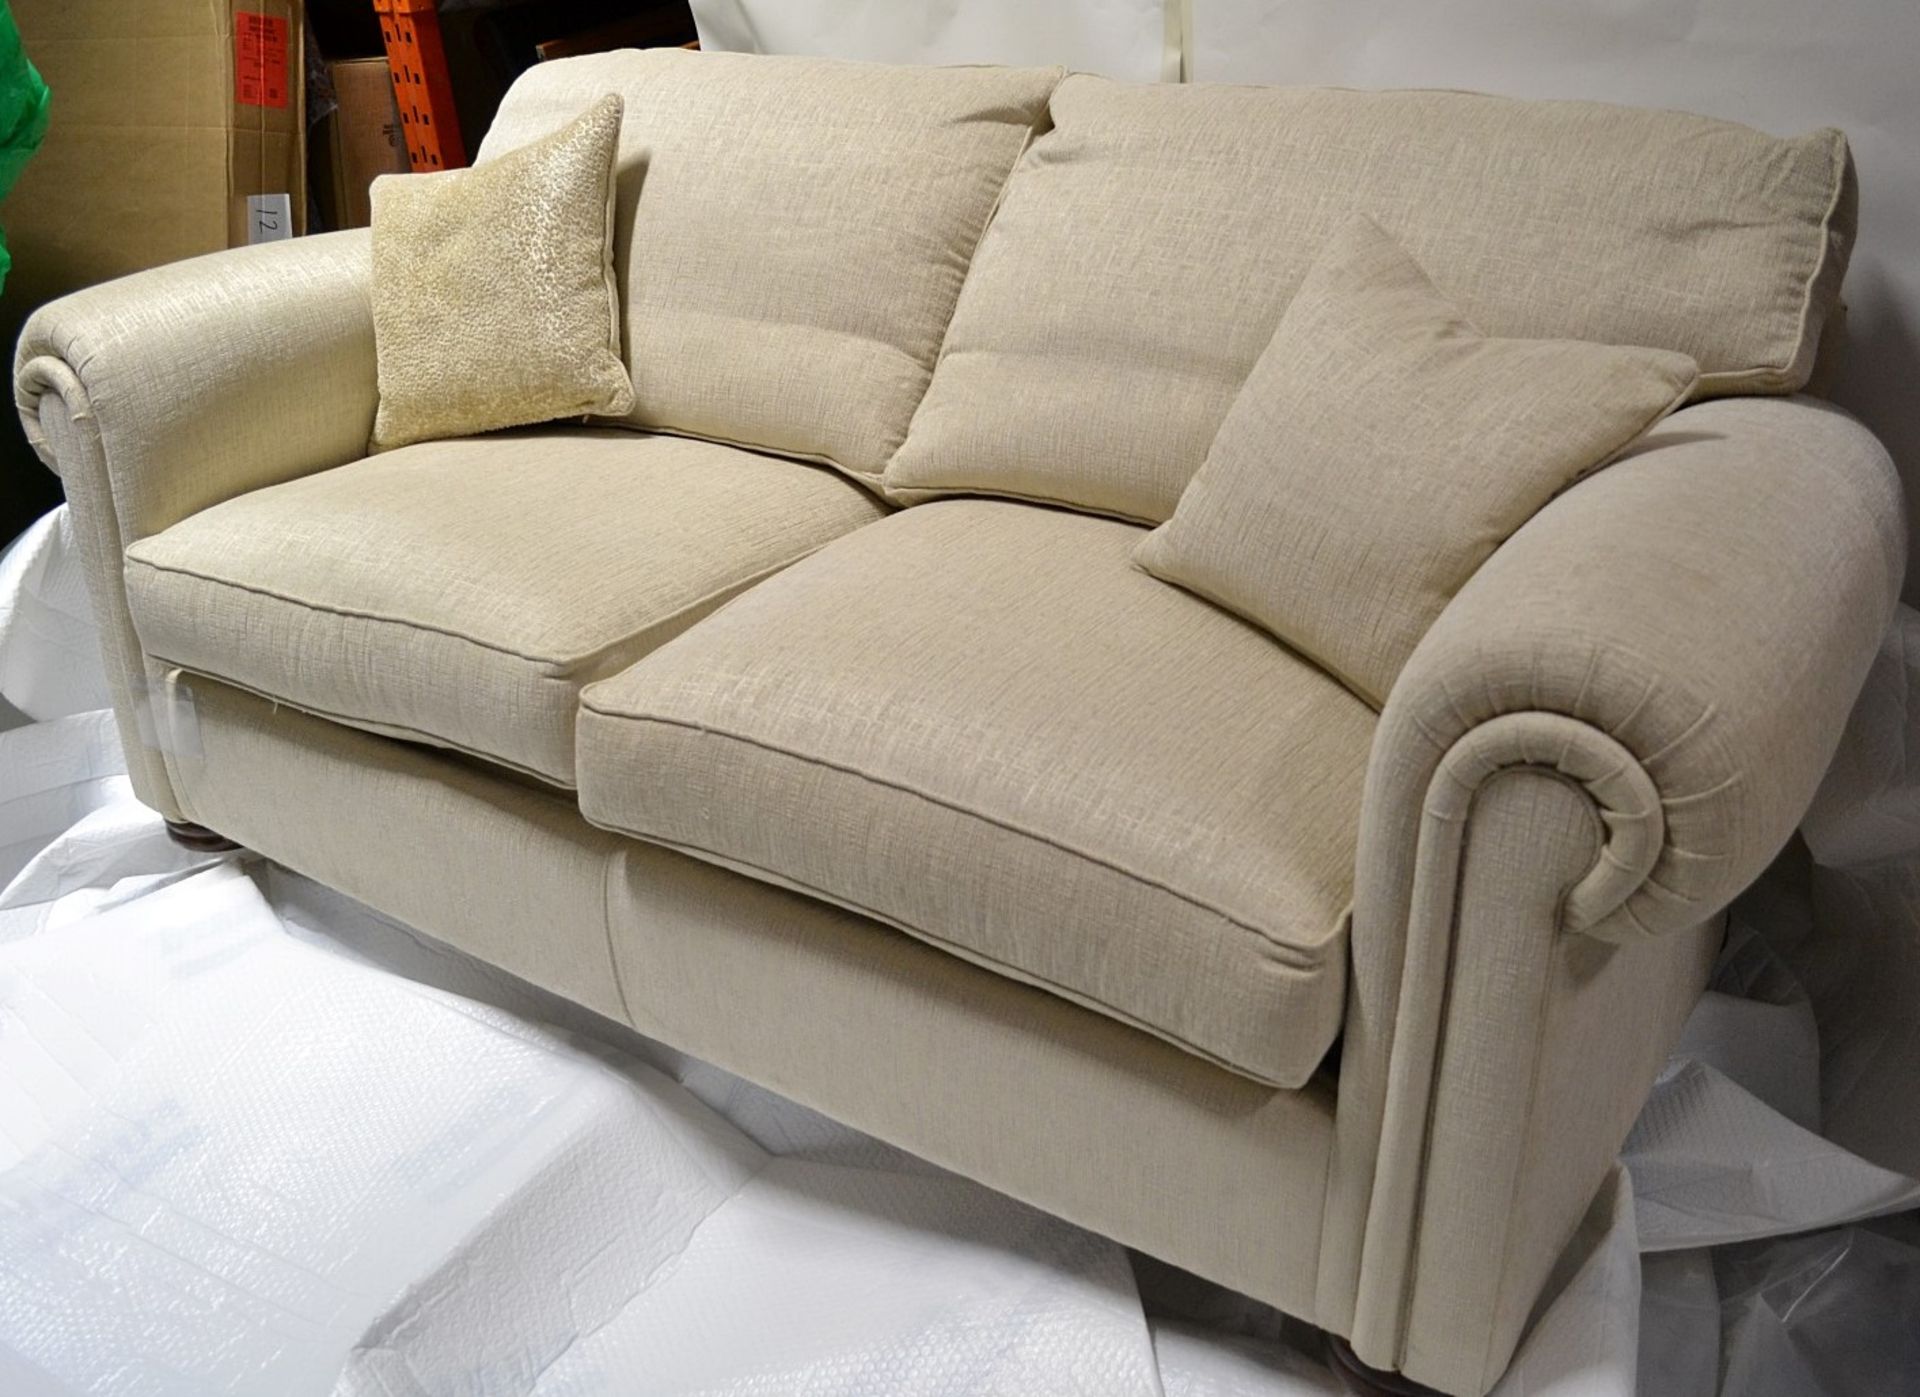 1 x DURESTA Waldorf Zephyr Sofabed With Mattress - Stunning Example In Excellent Condition - Fully - Image 3 of 14